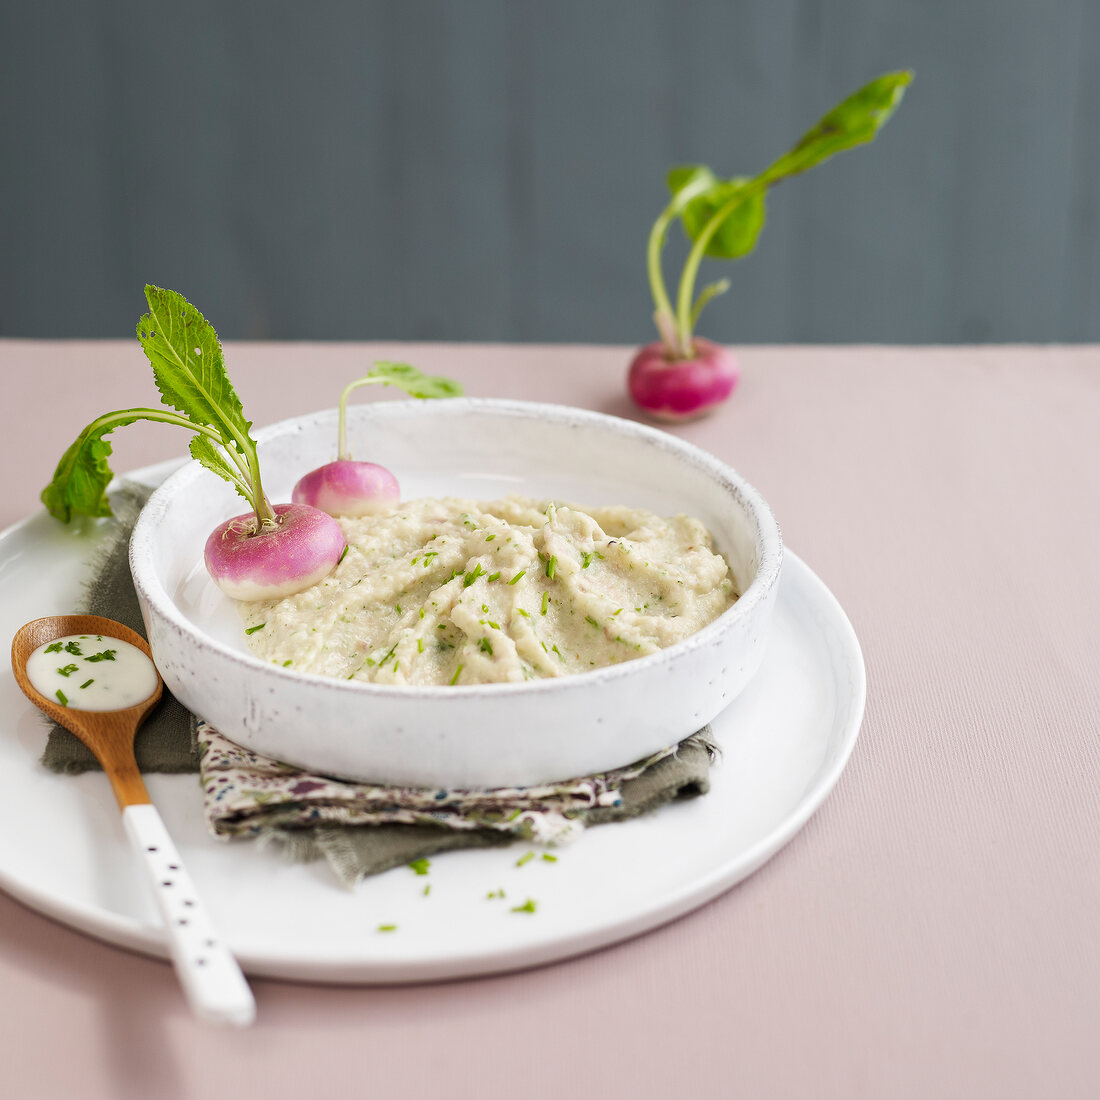 Turnip puree with chives